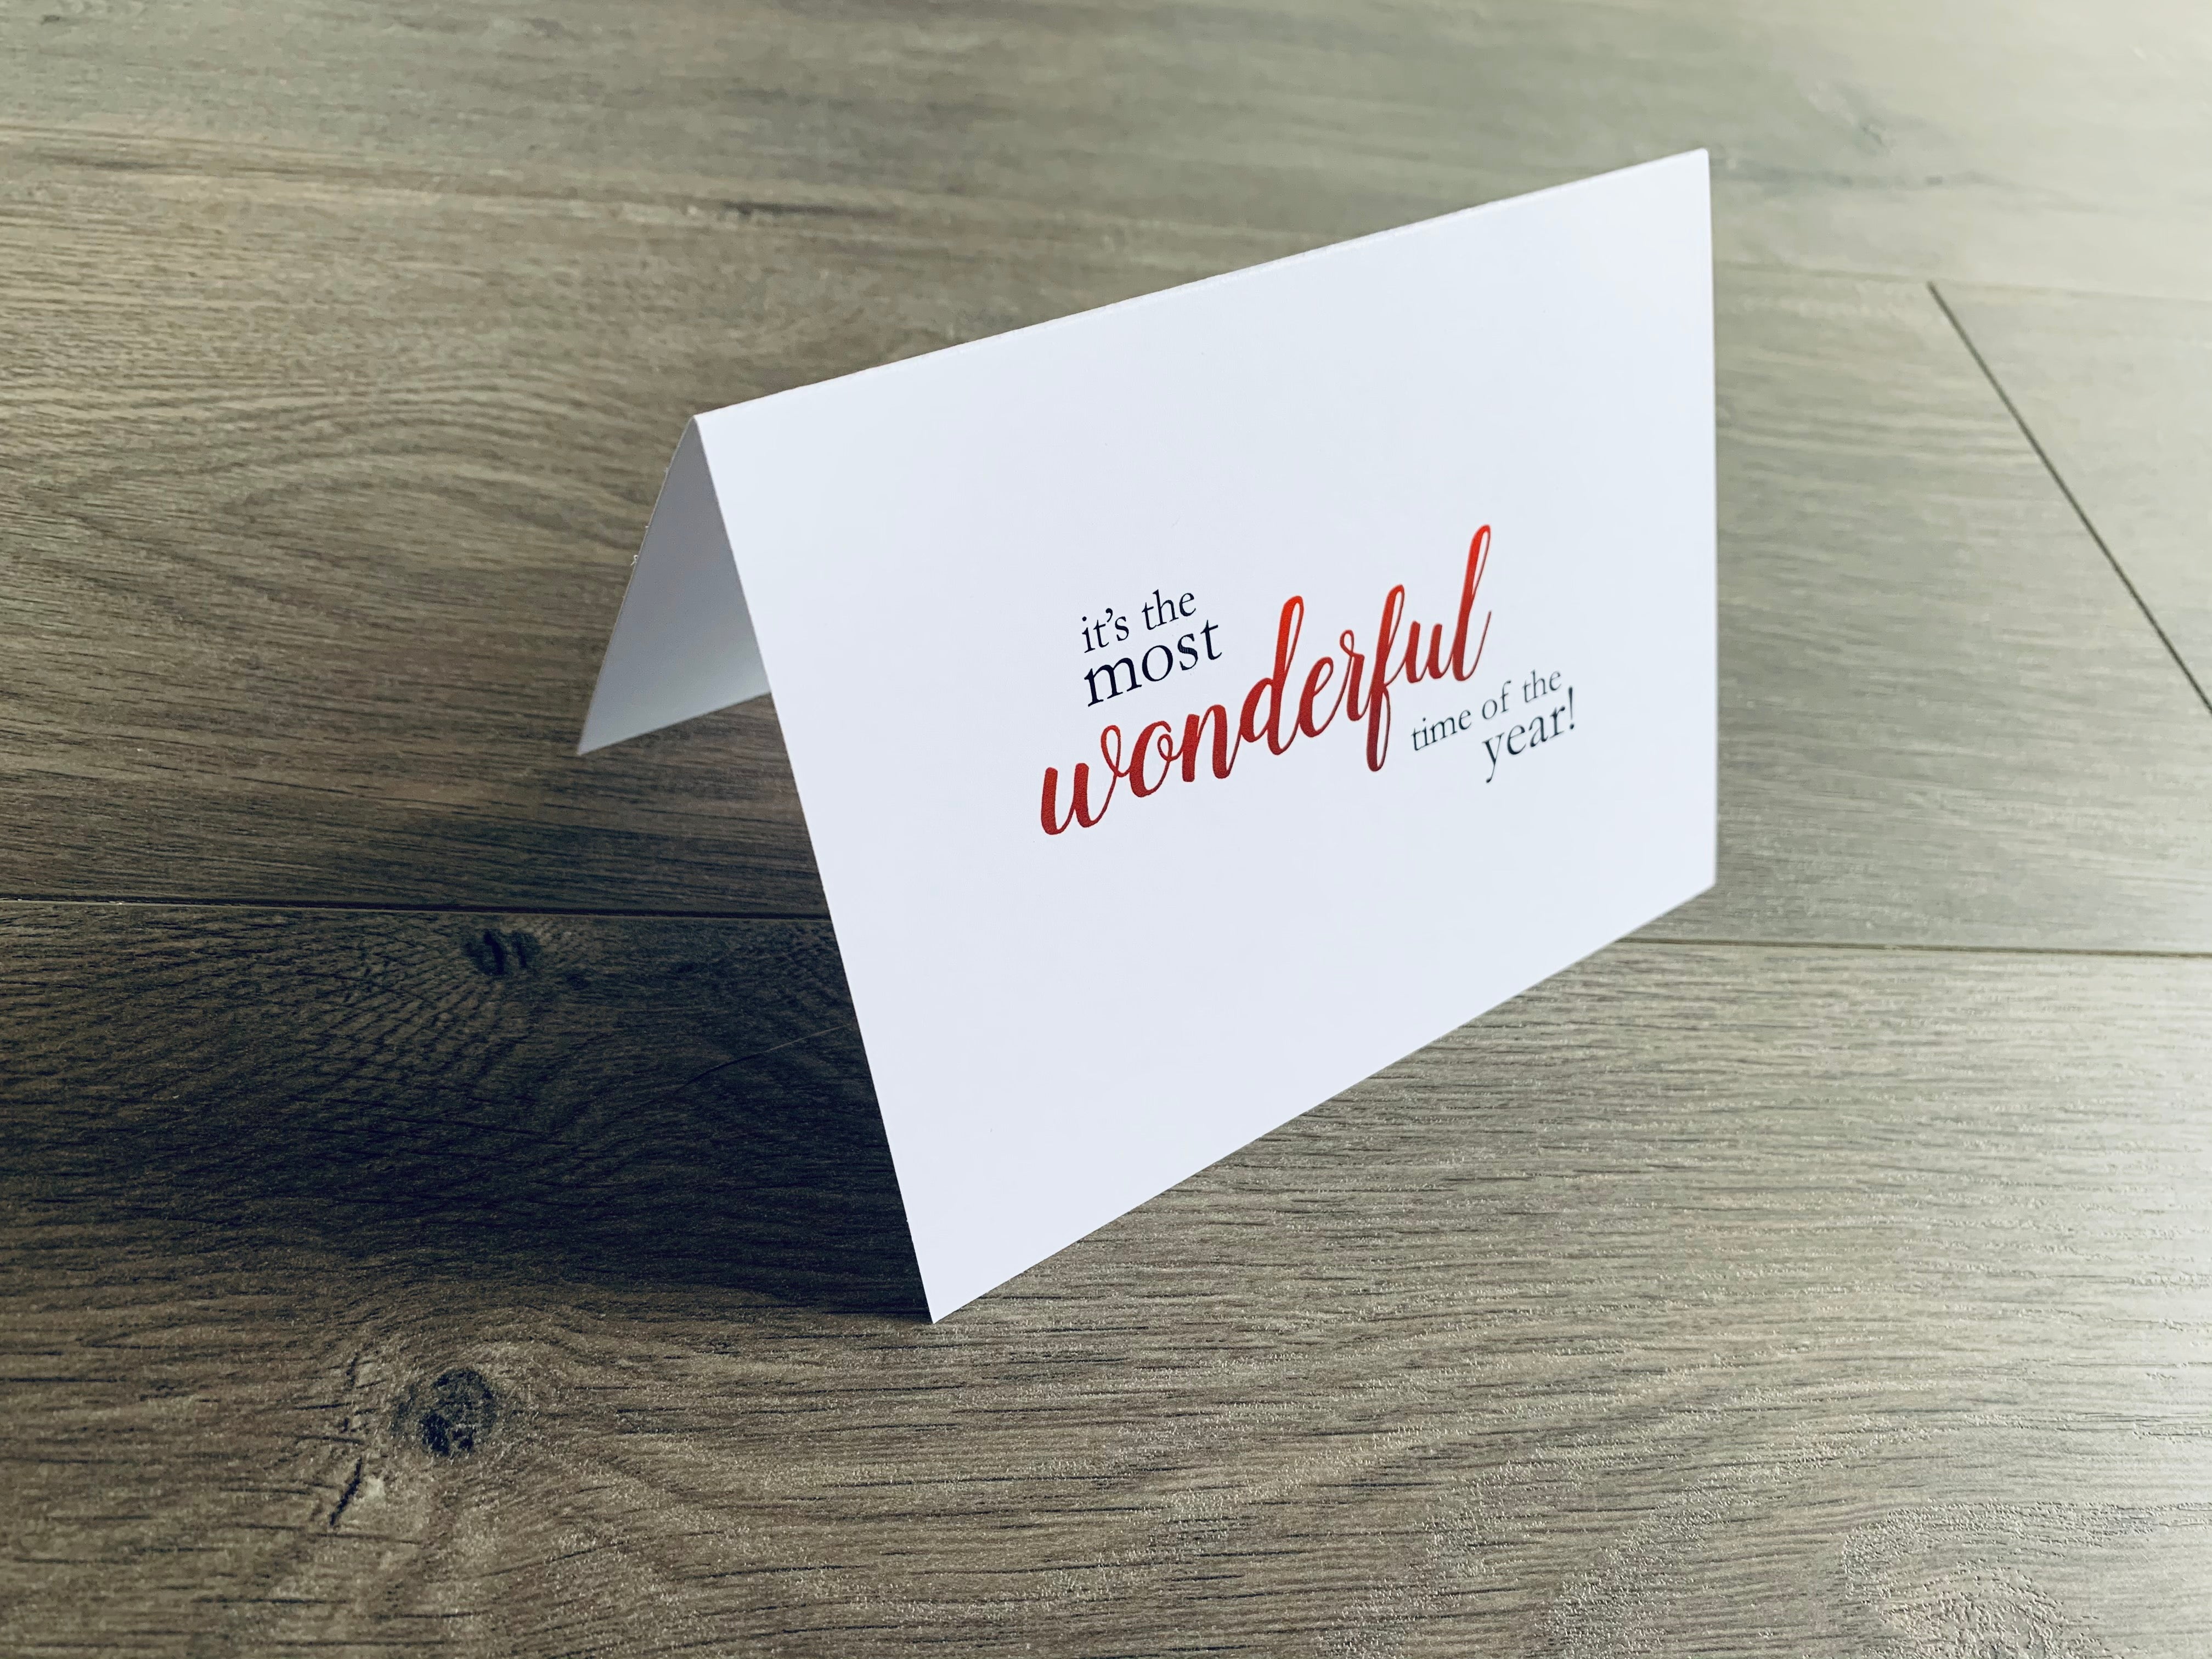 A white, folded notecard sits on a wooden floor. The card says, "it's the most wonderful time of the year!" Christmas Magic collection by Stationare.